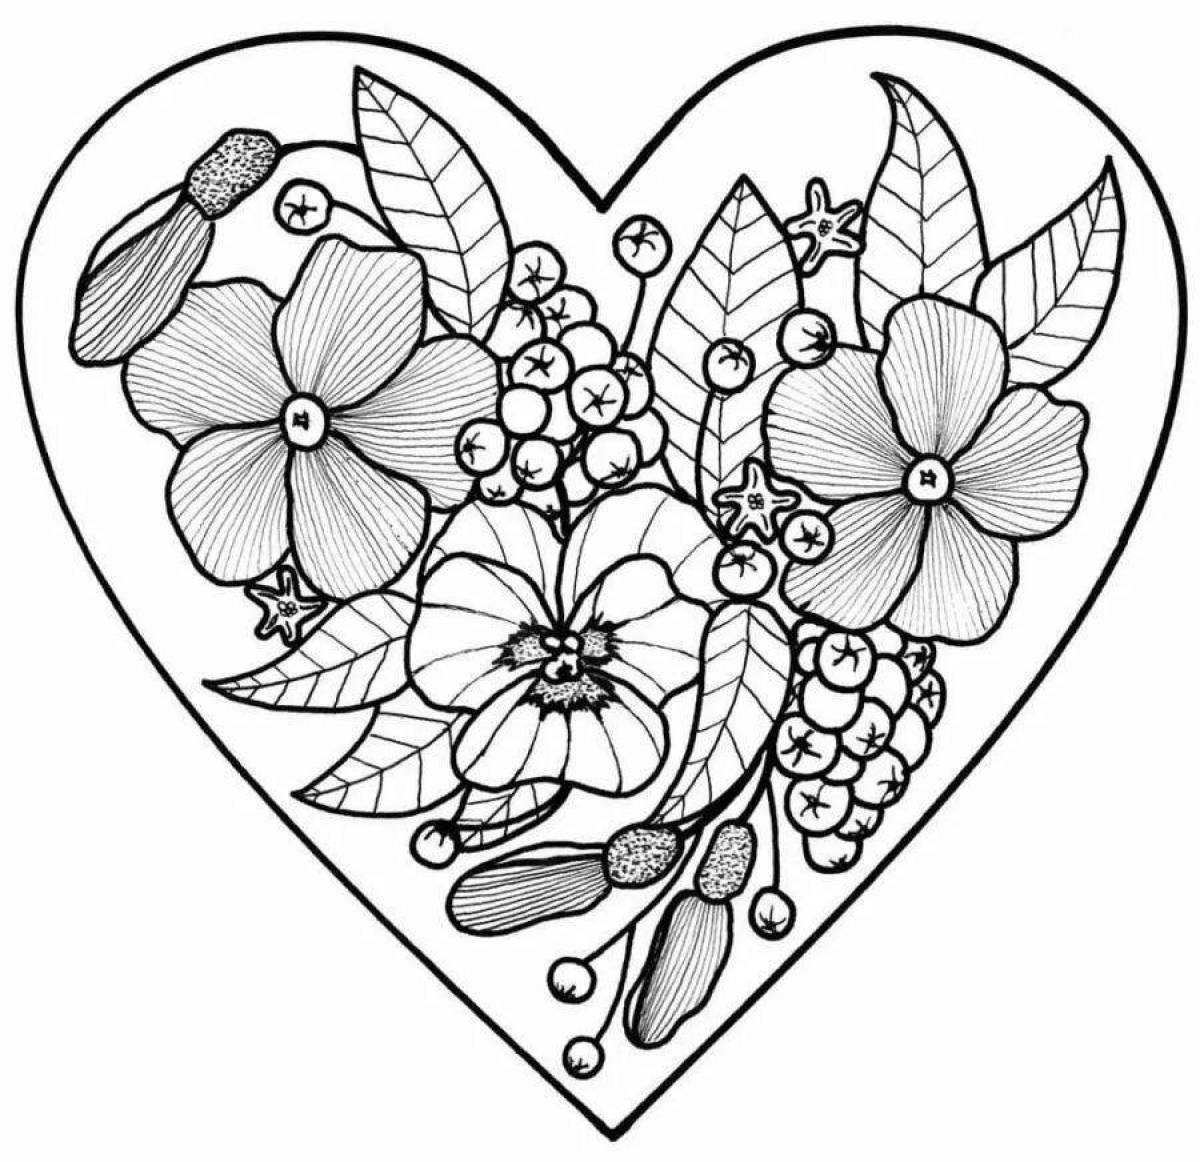 Coloring majestic heart antistress